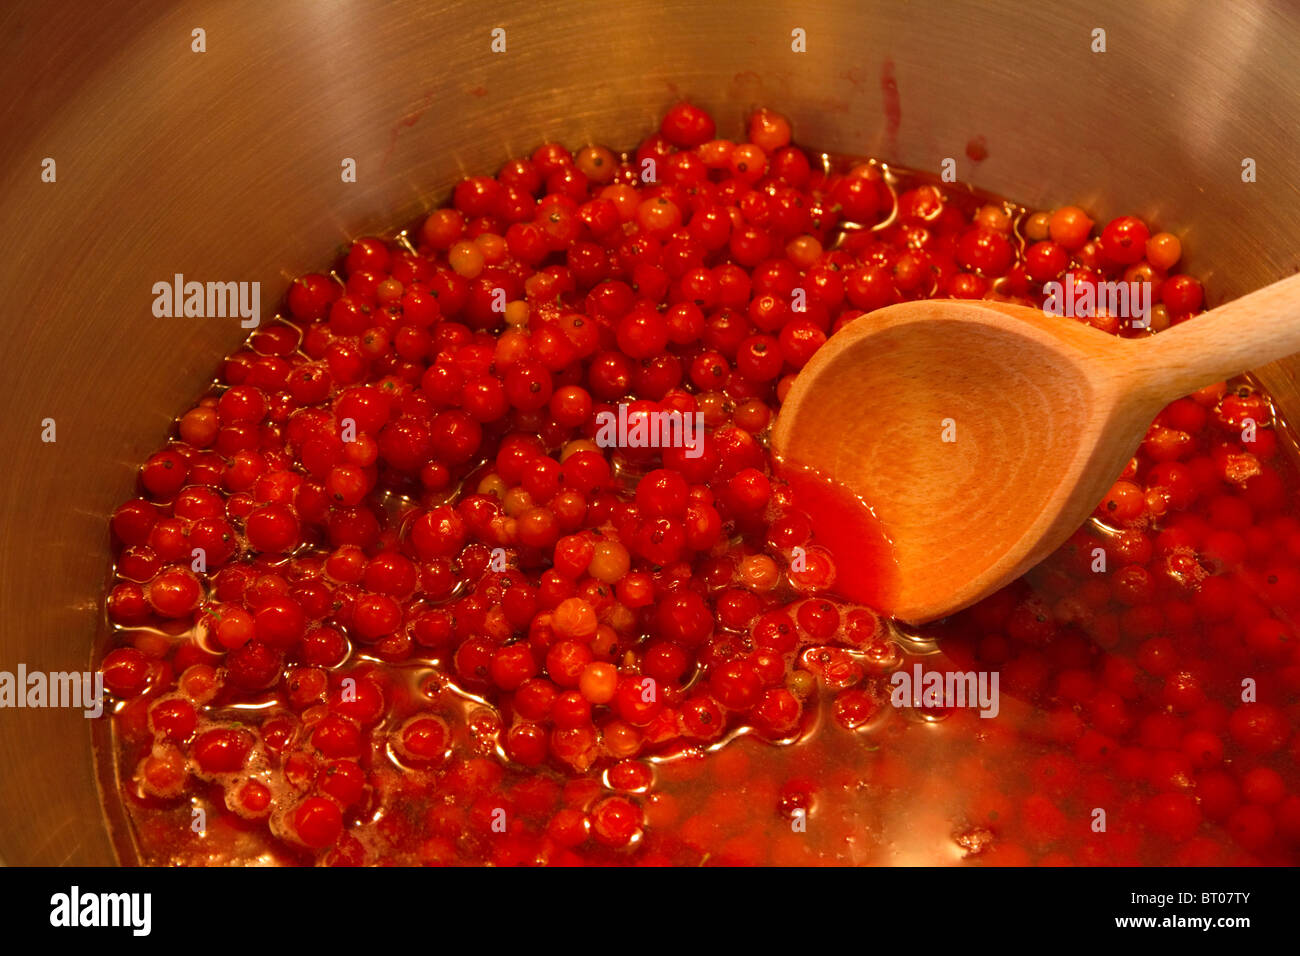 Red Jelly With Spoon Stock Photos Red Jelly With Spoon Stock